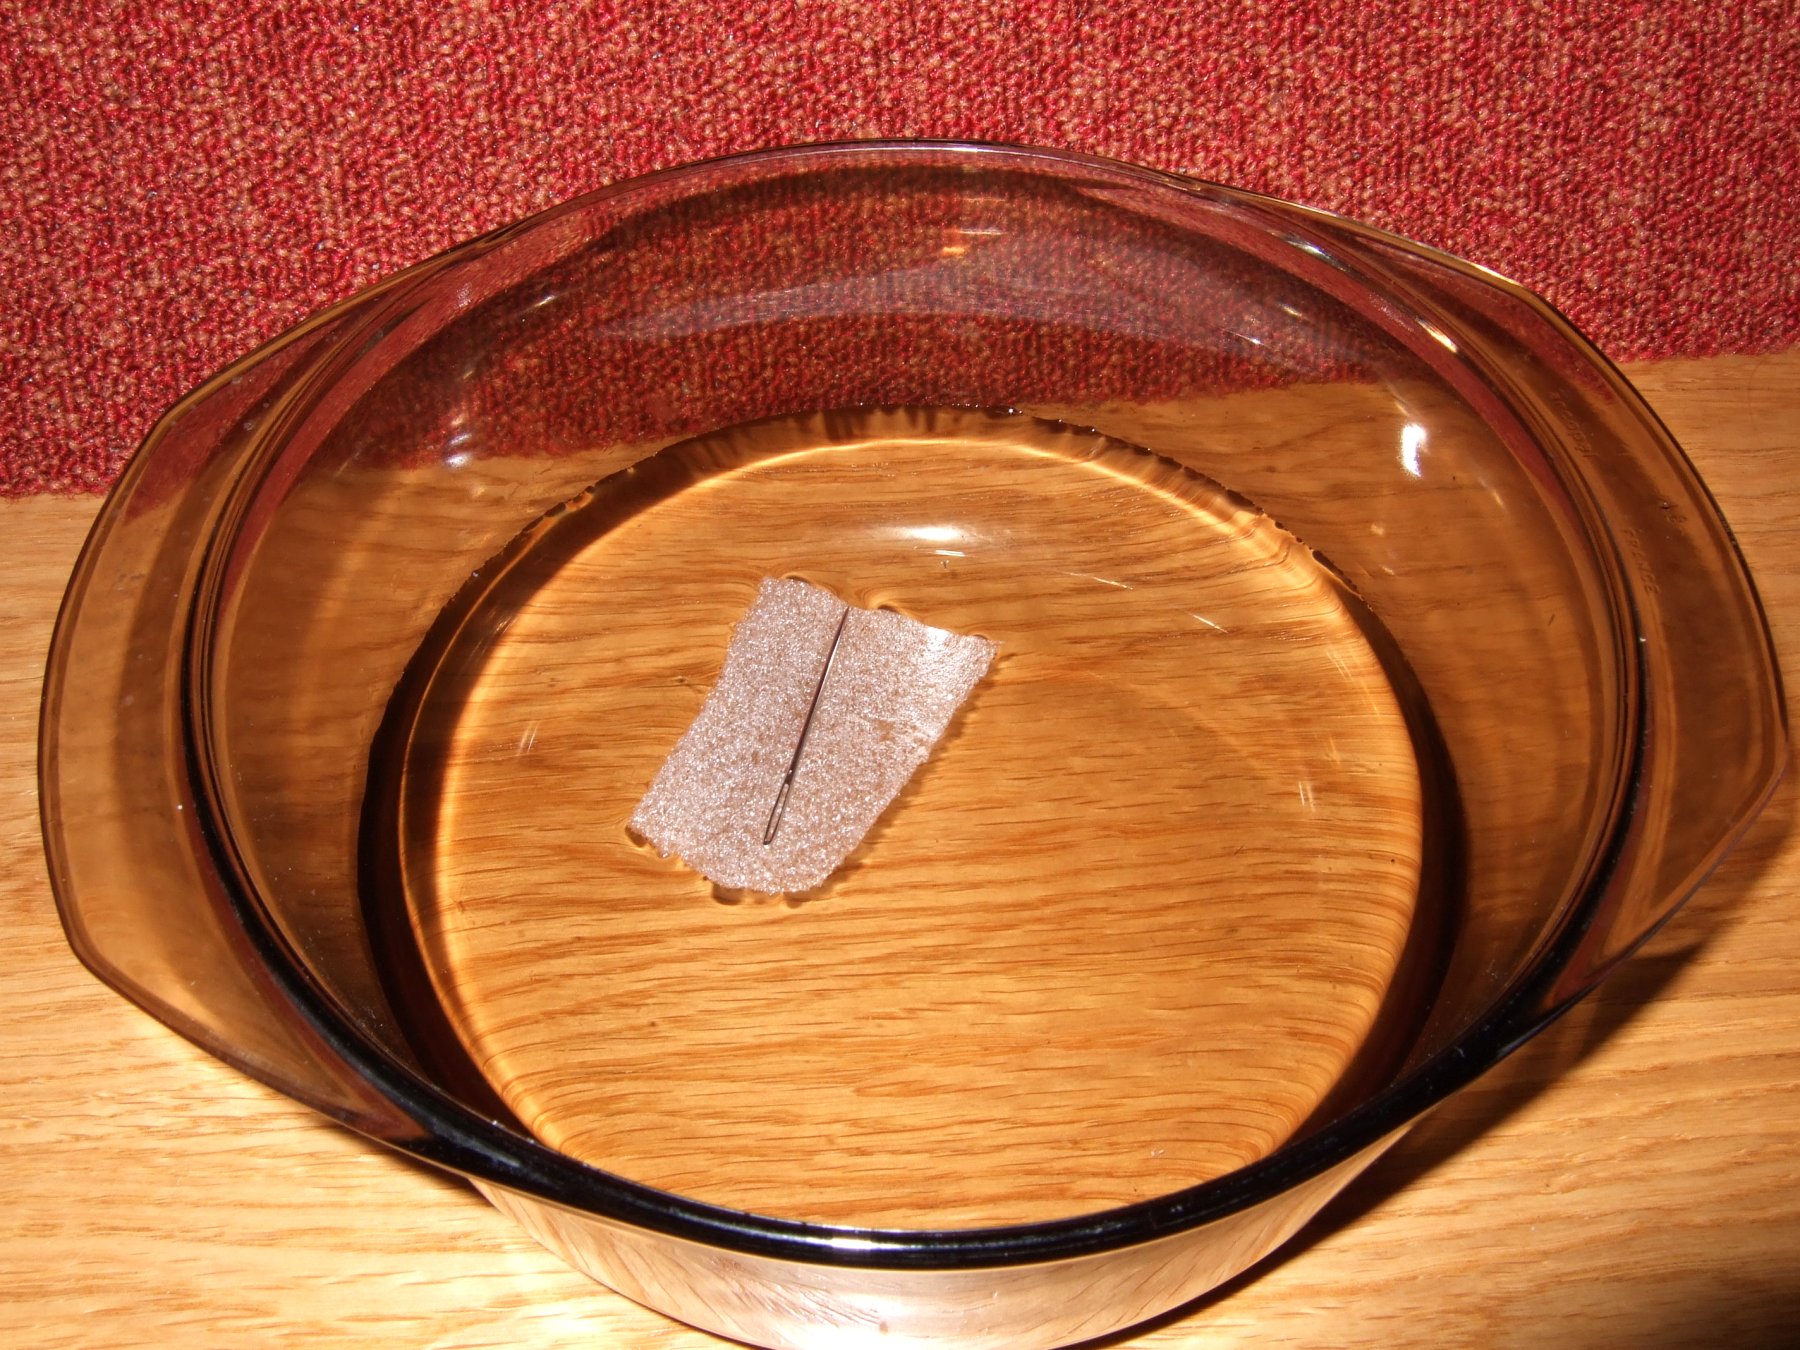 The compass is formed by floating the magnetised needle in the centre of the bowl